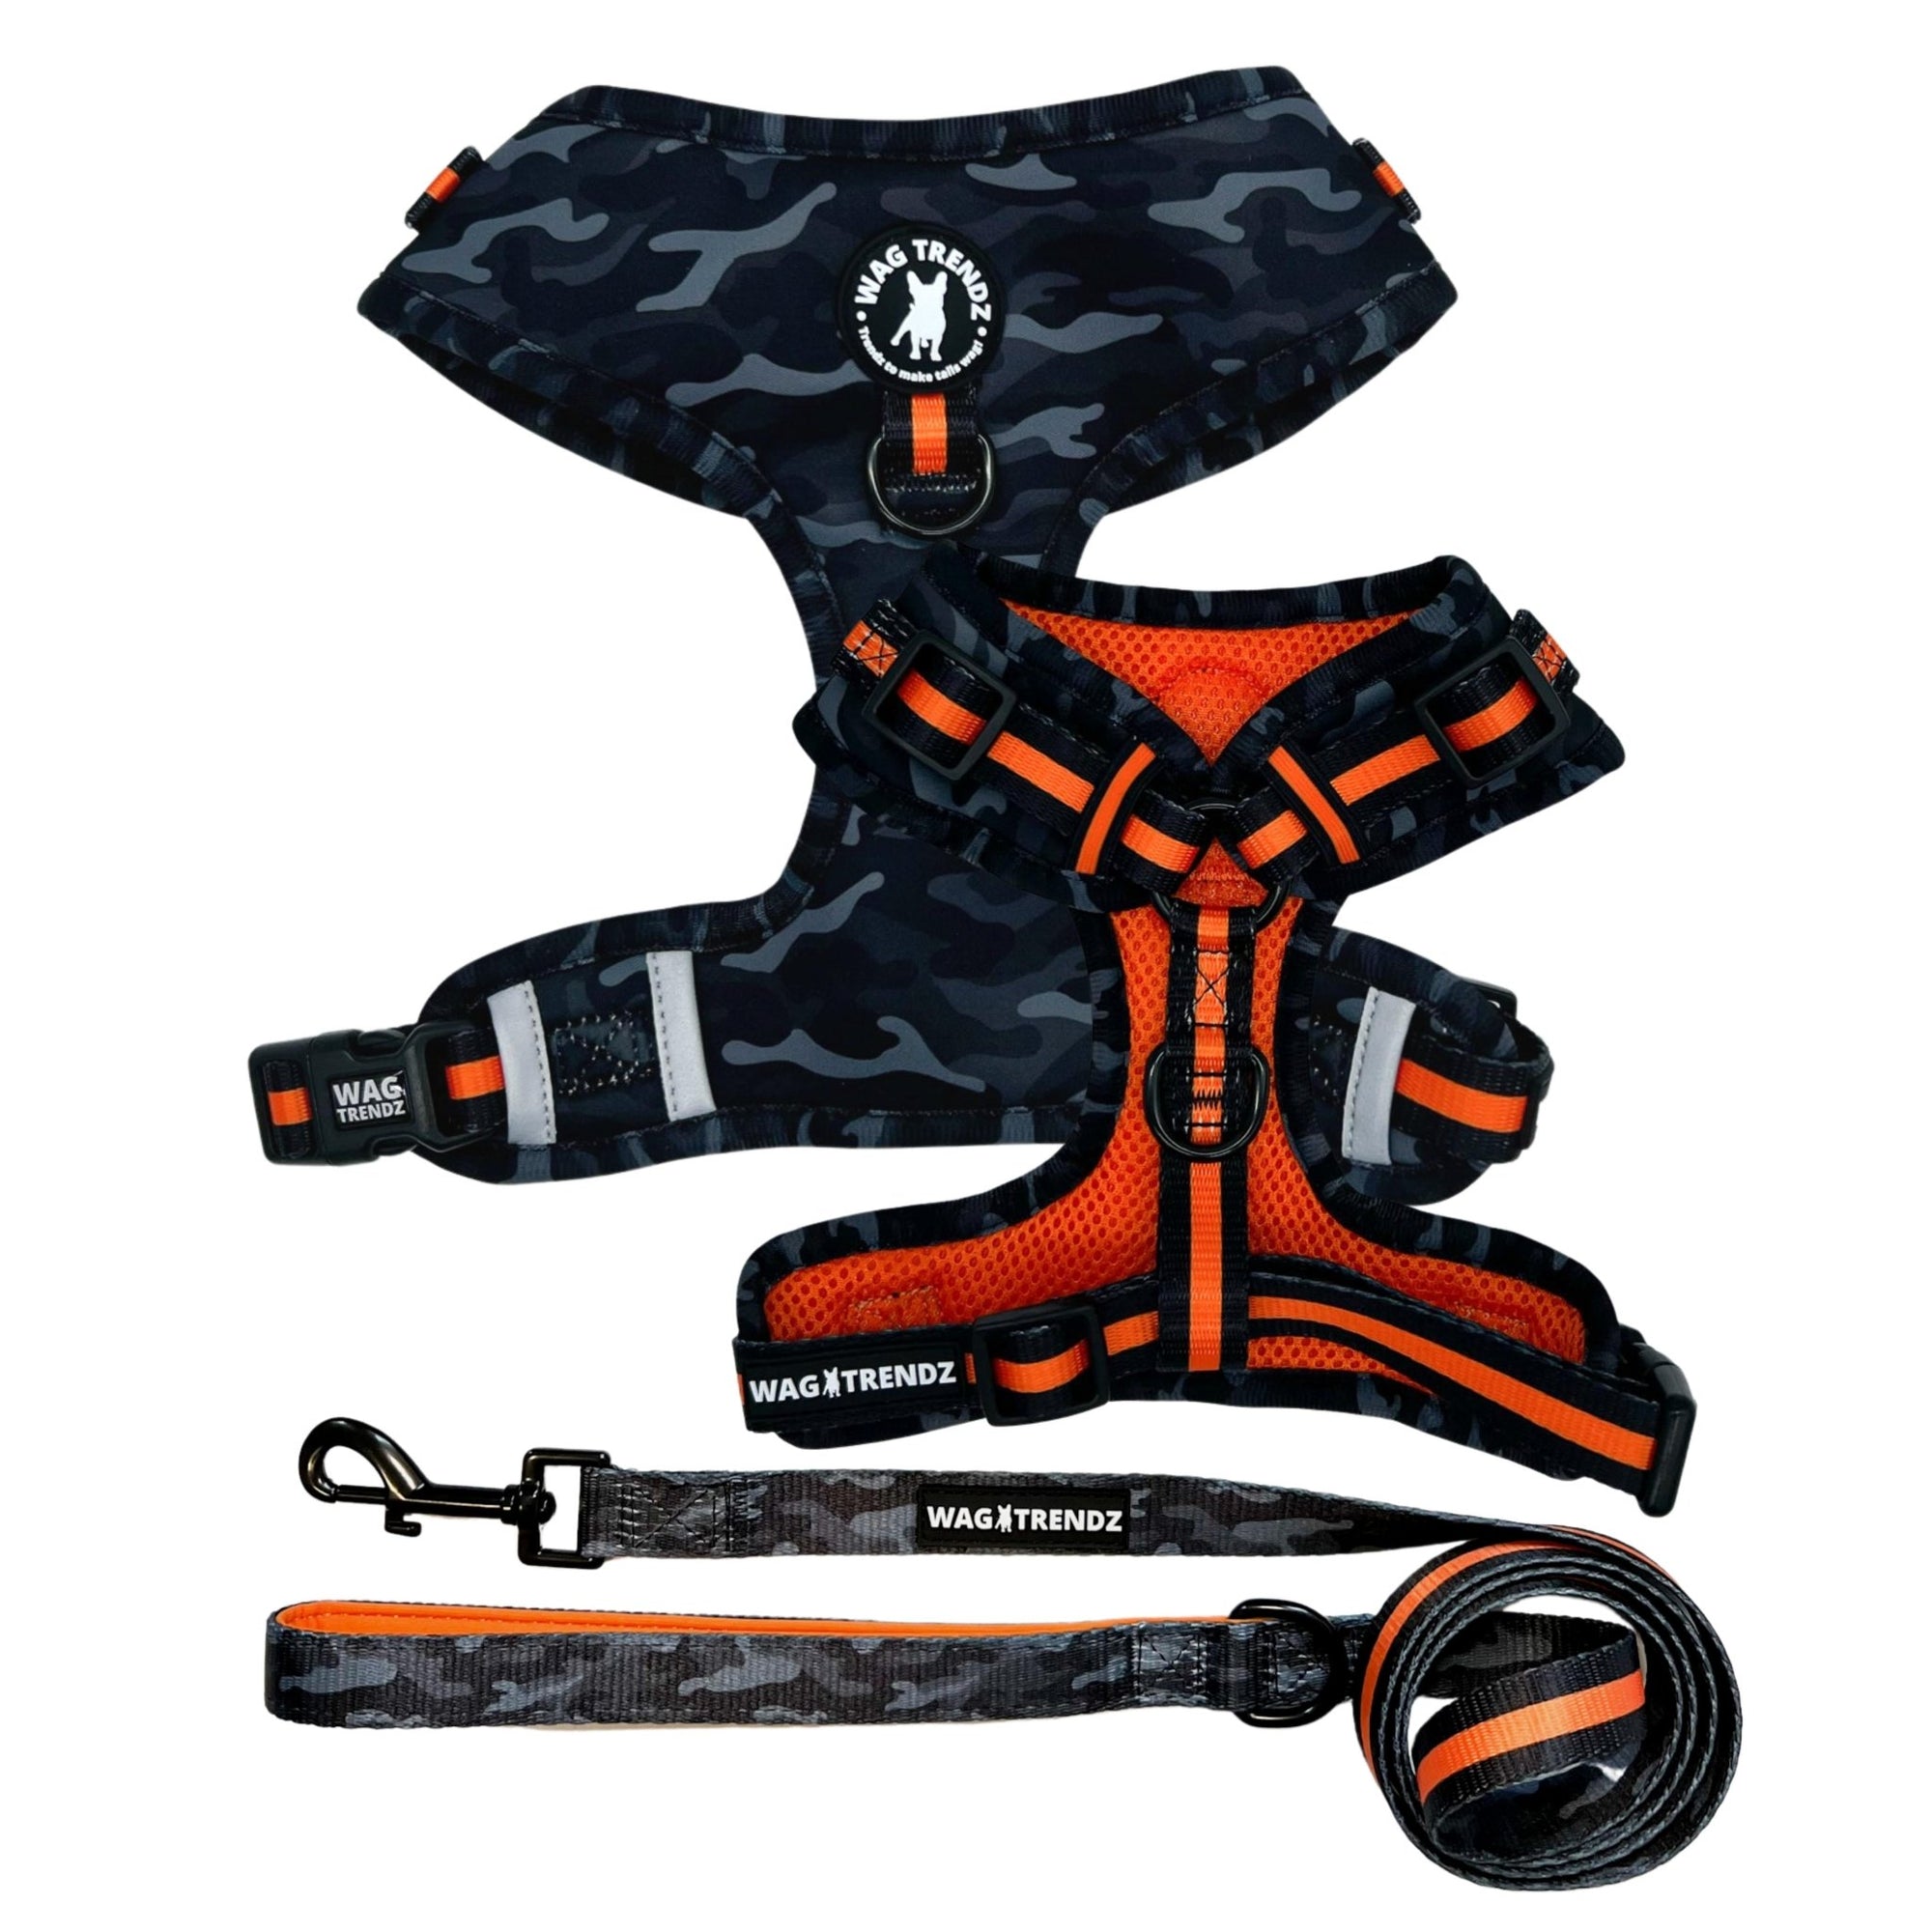 Dog Harness and Leash Set - Black &amp; Gray camo dog harness with Orange Accents and Matching Dog Leash - against solid white background - Wag Trendz